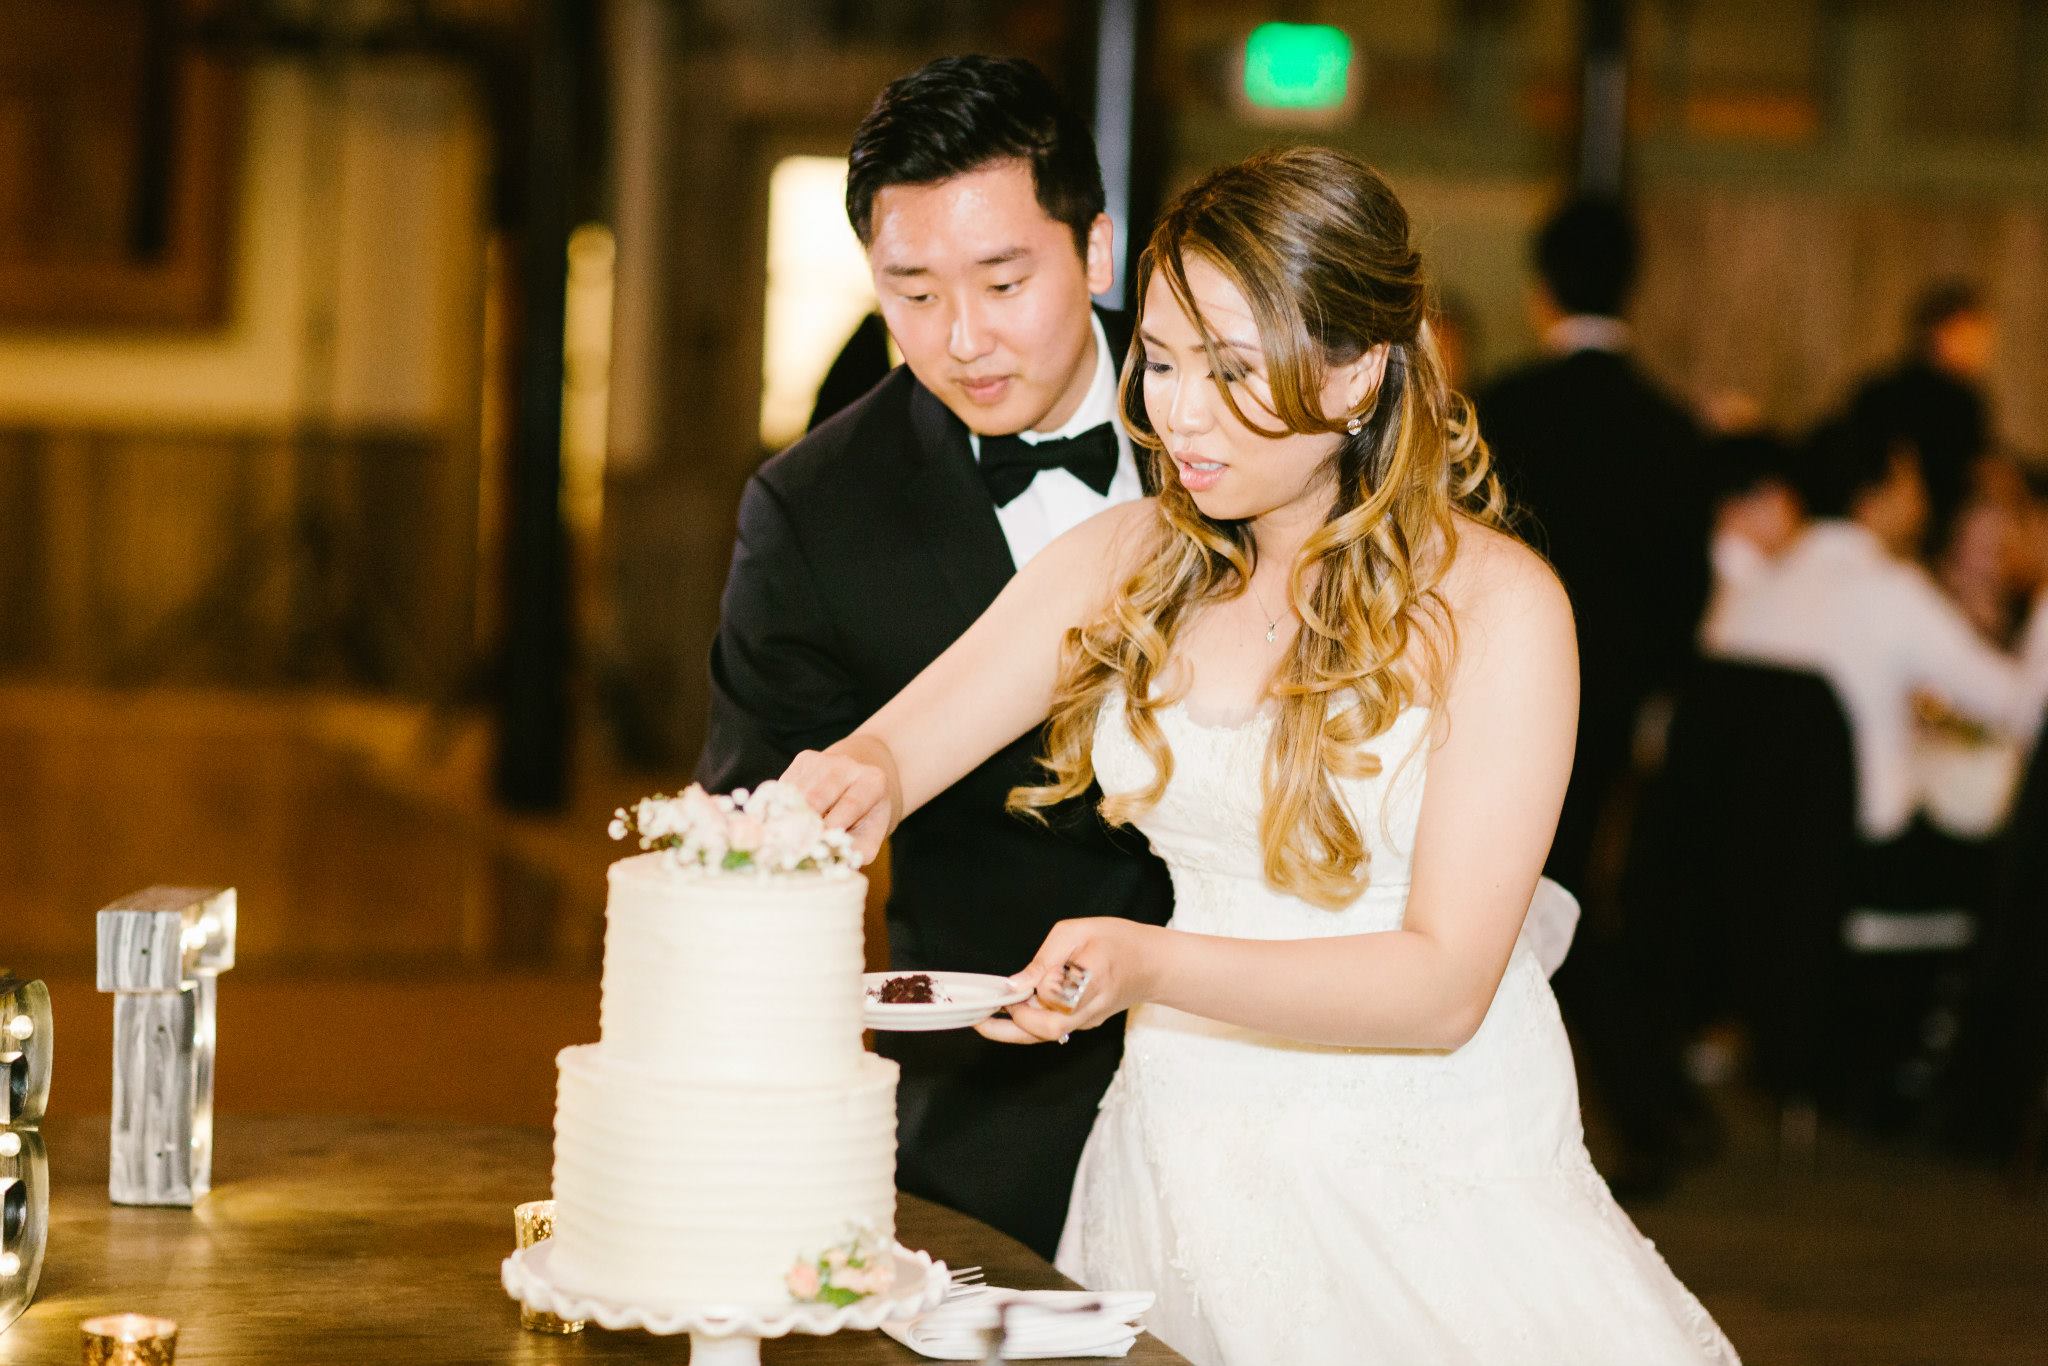 Rustic and elegant wedding at Calamigos Ranch in the Redwood room, bride and groom cutting cake